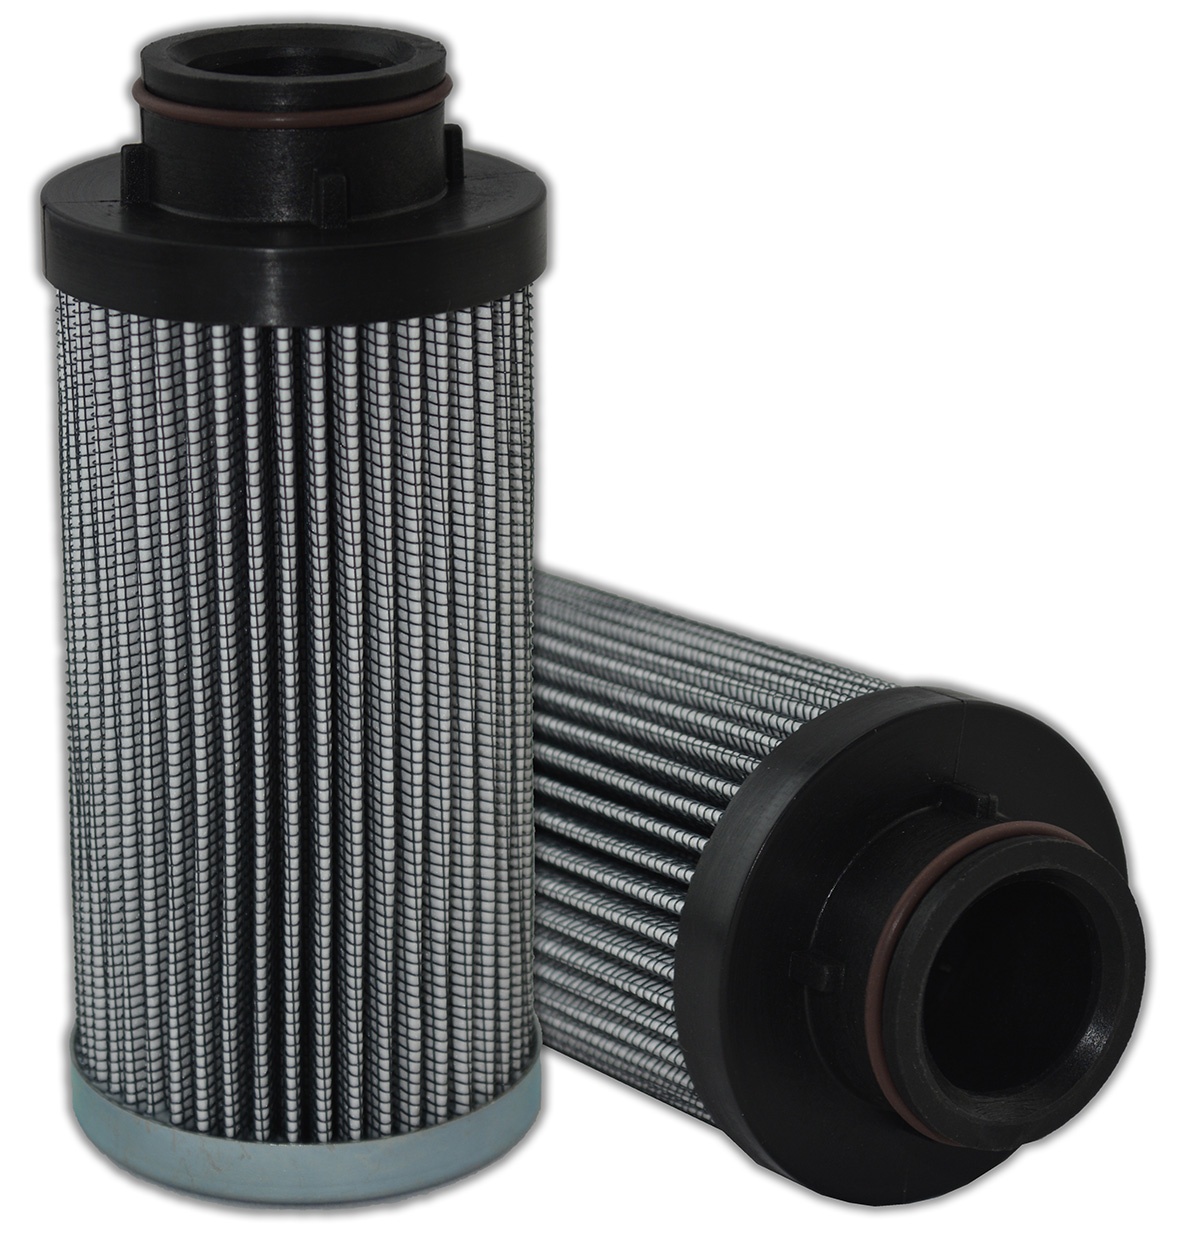 Interchange Hydraulic Filter, Glass, 3 Micron Rating, Viton Seal, 5.31 Inch Height